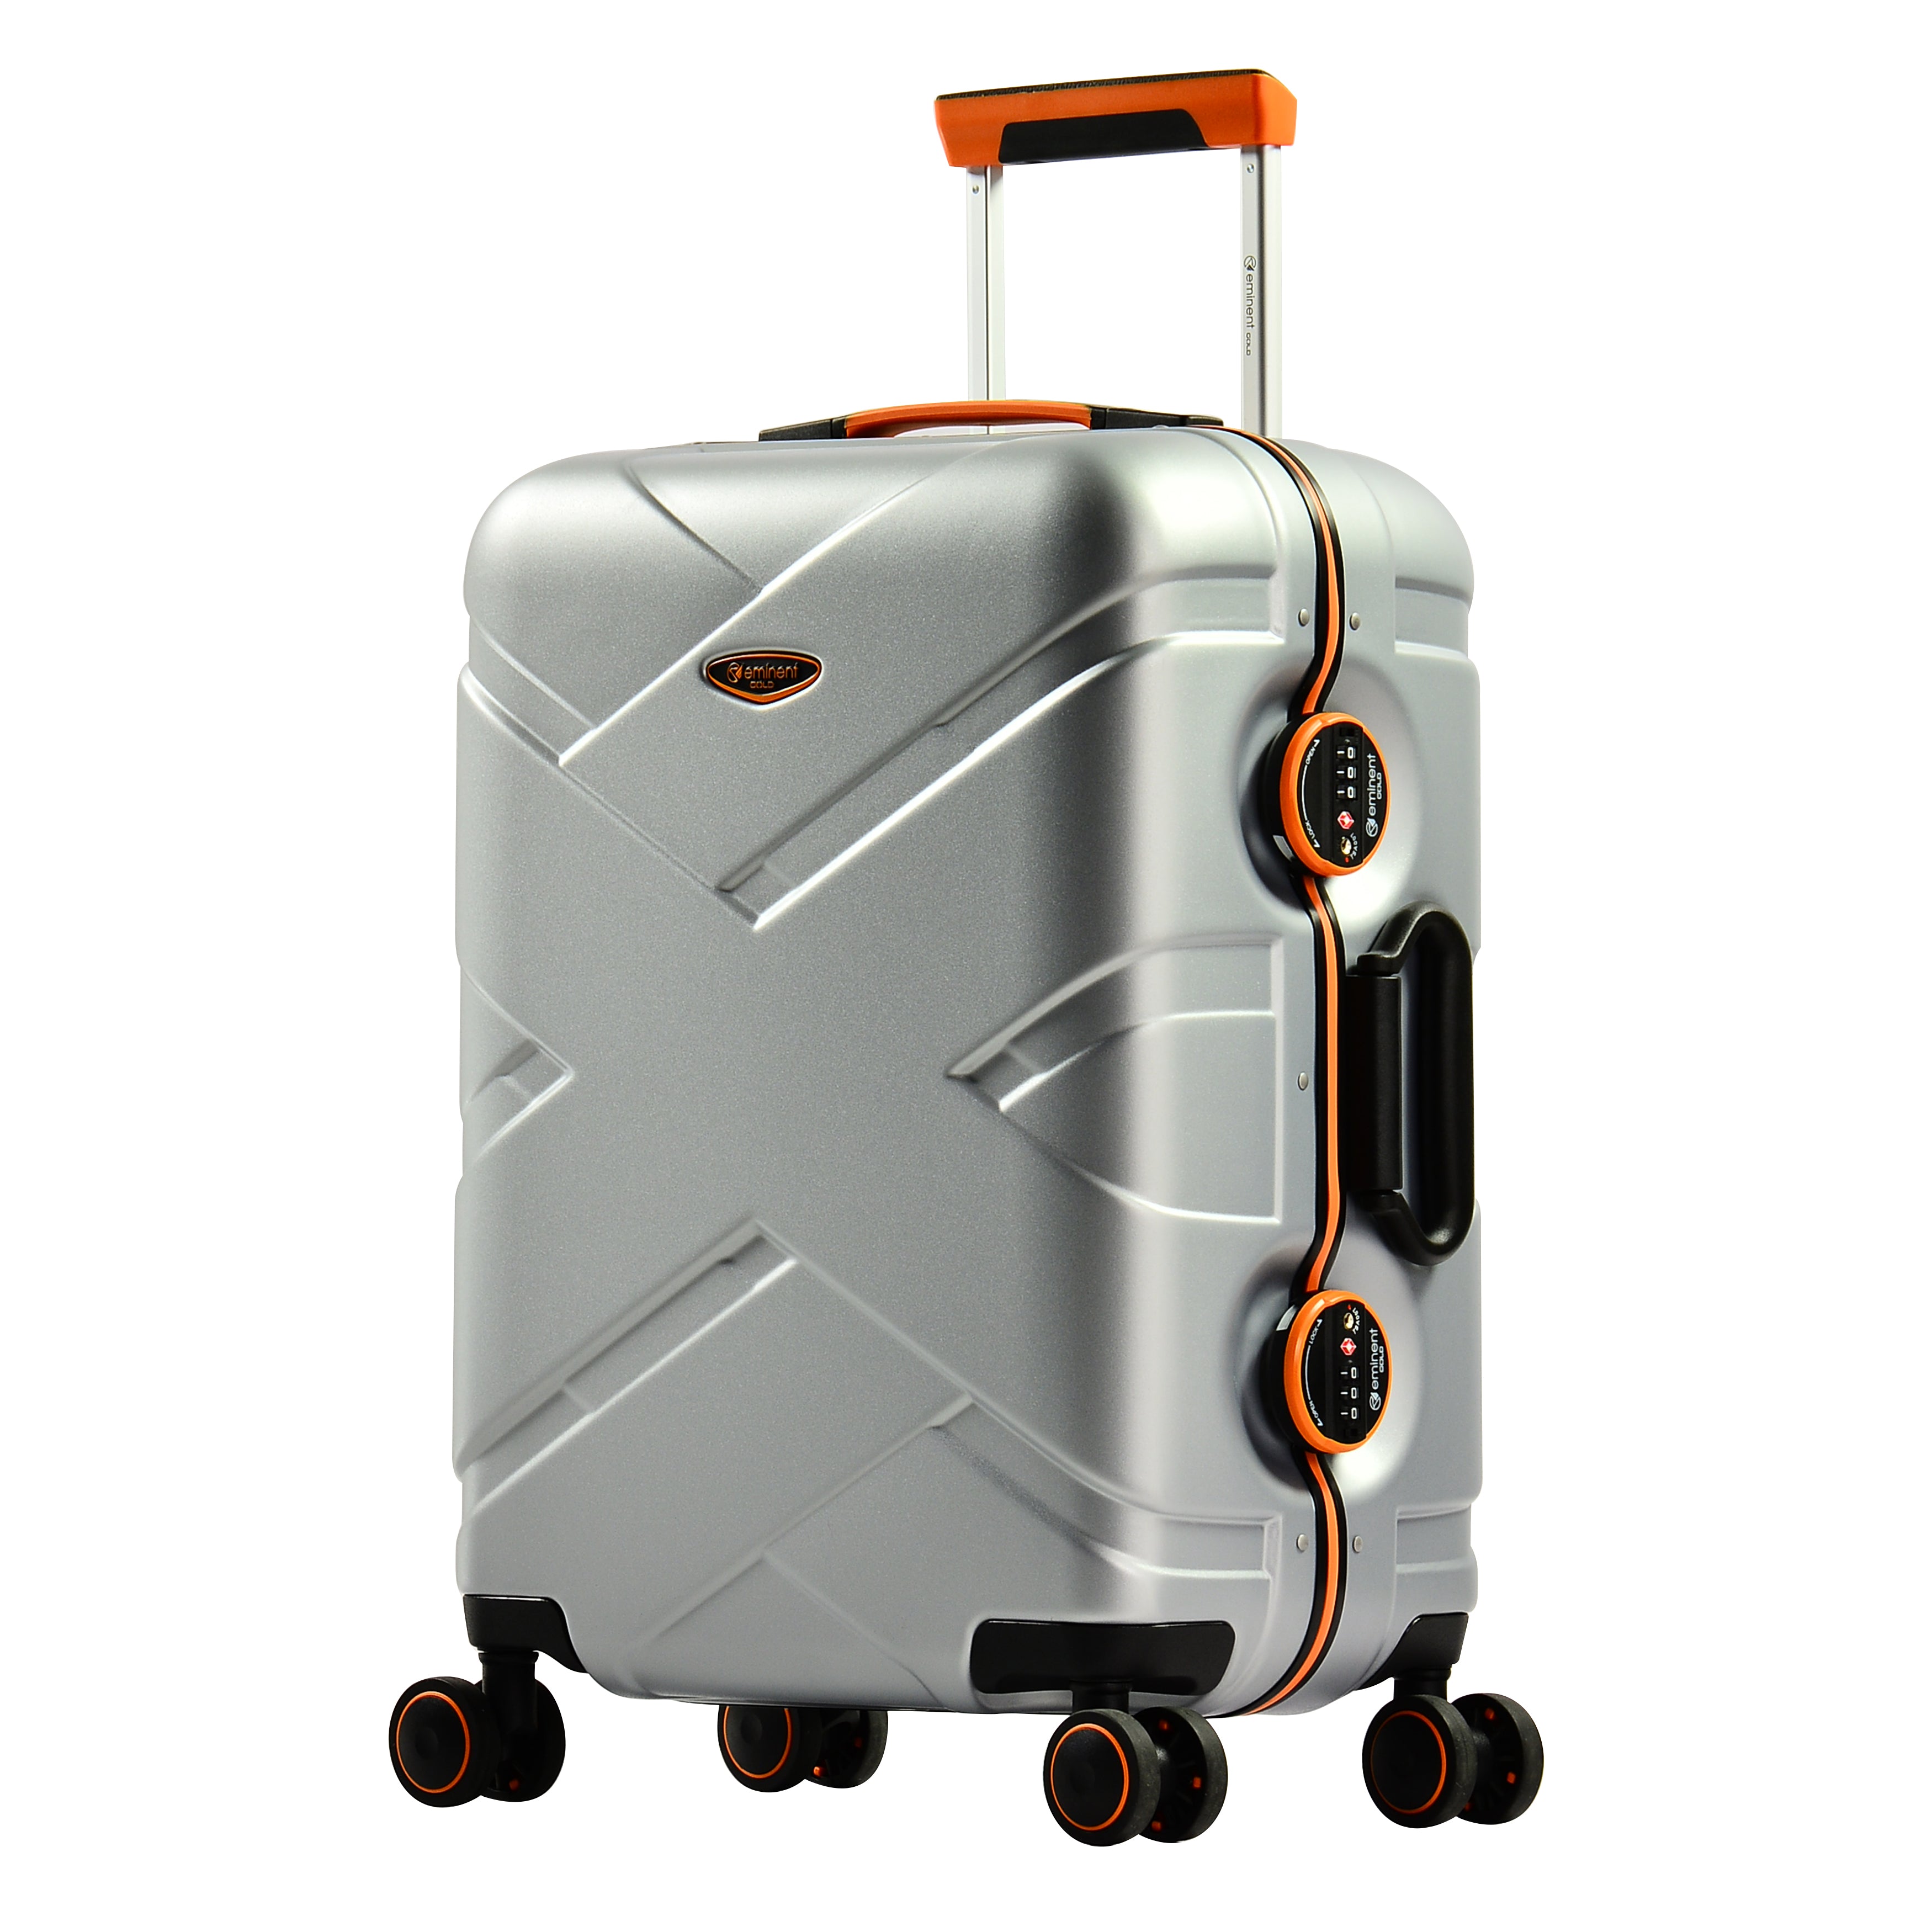 luggage trolley offers